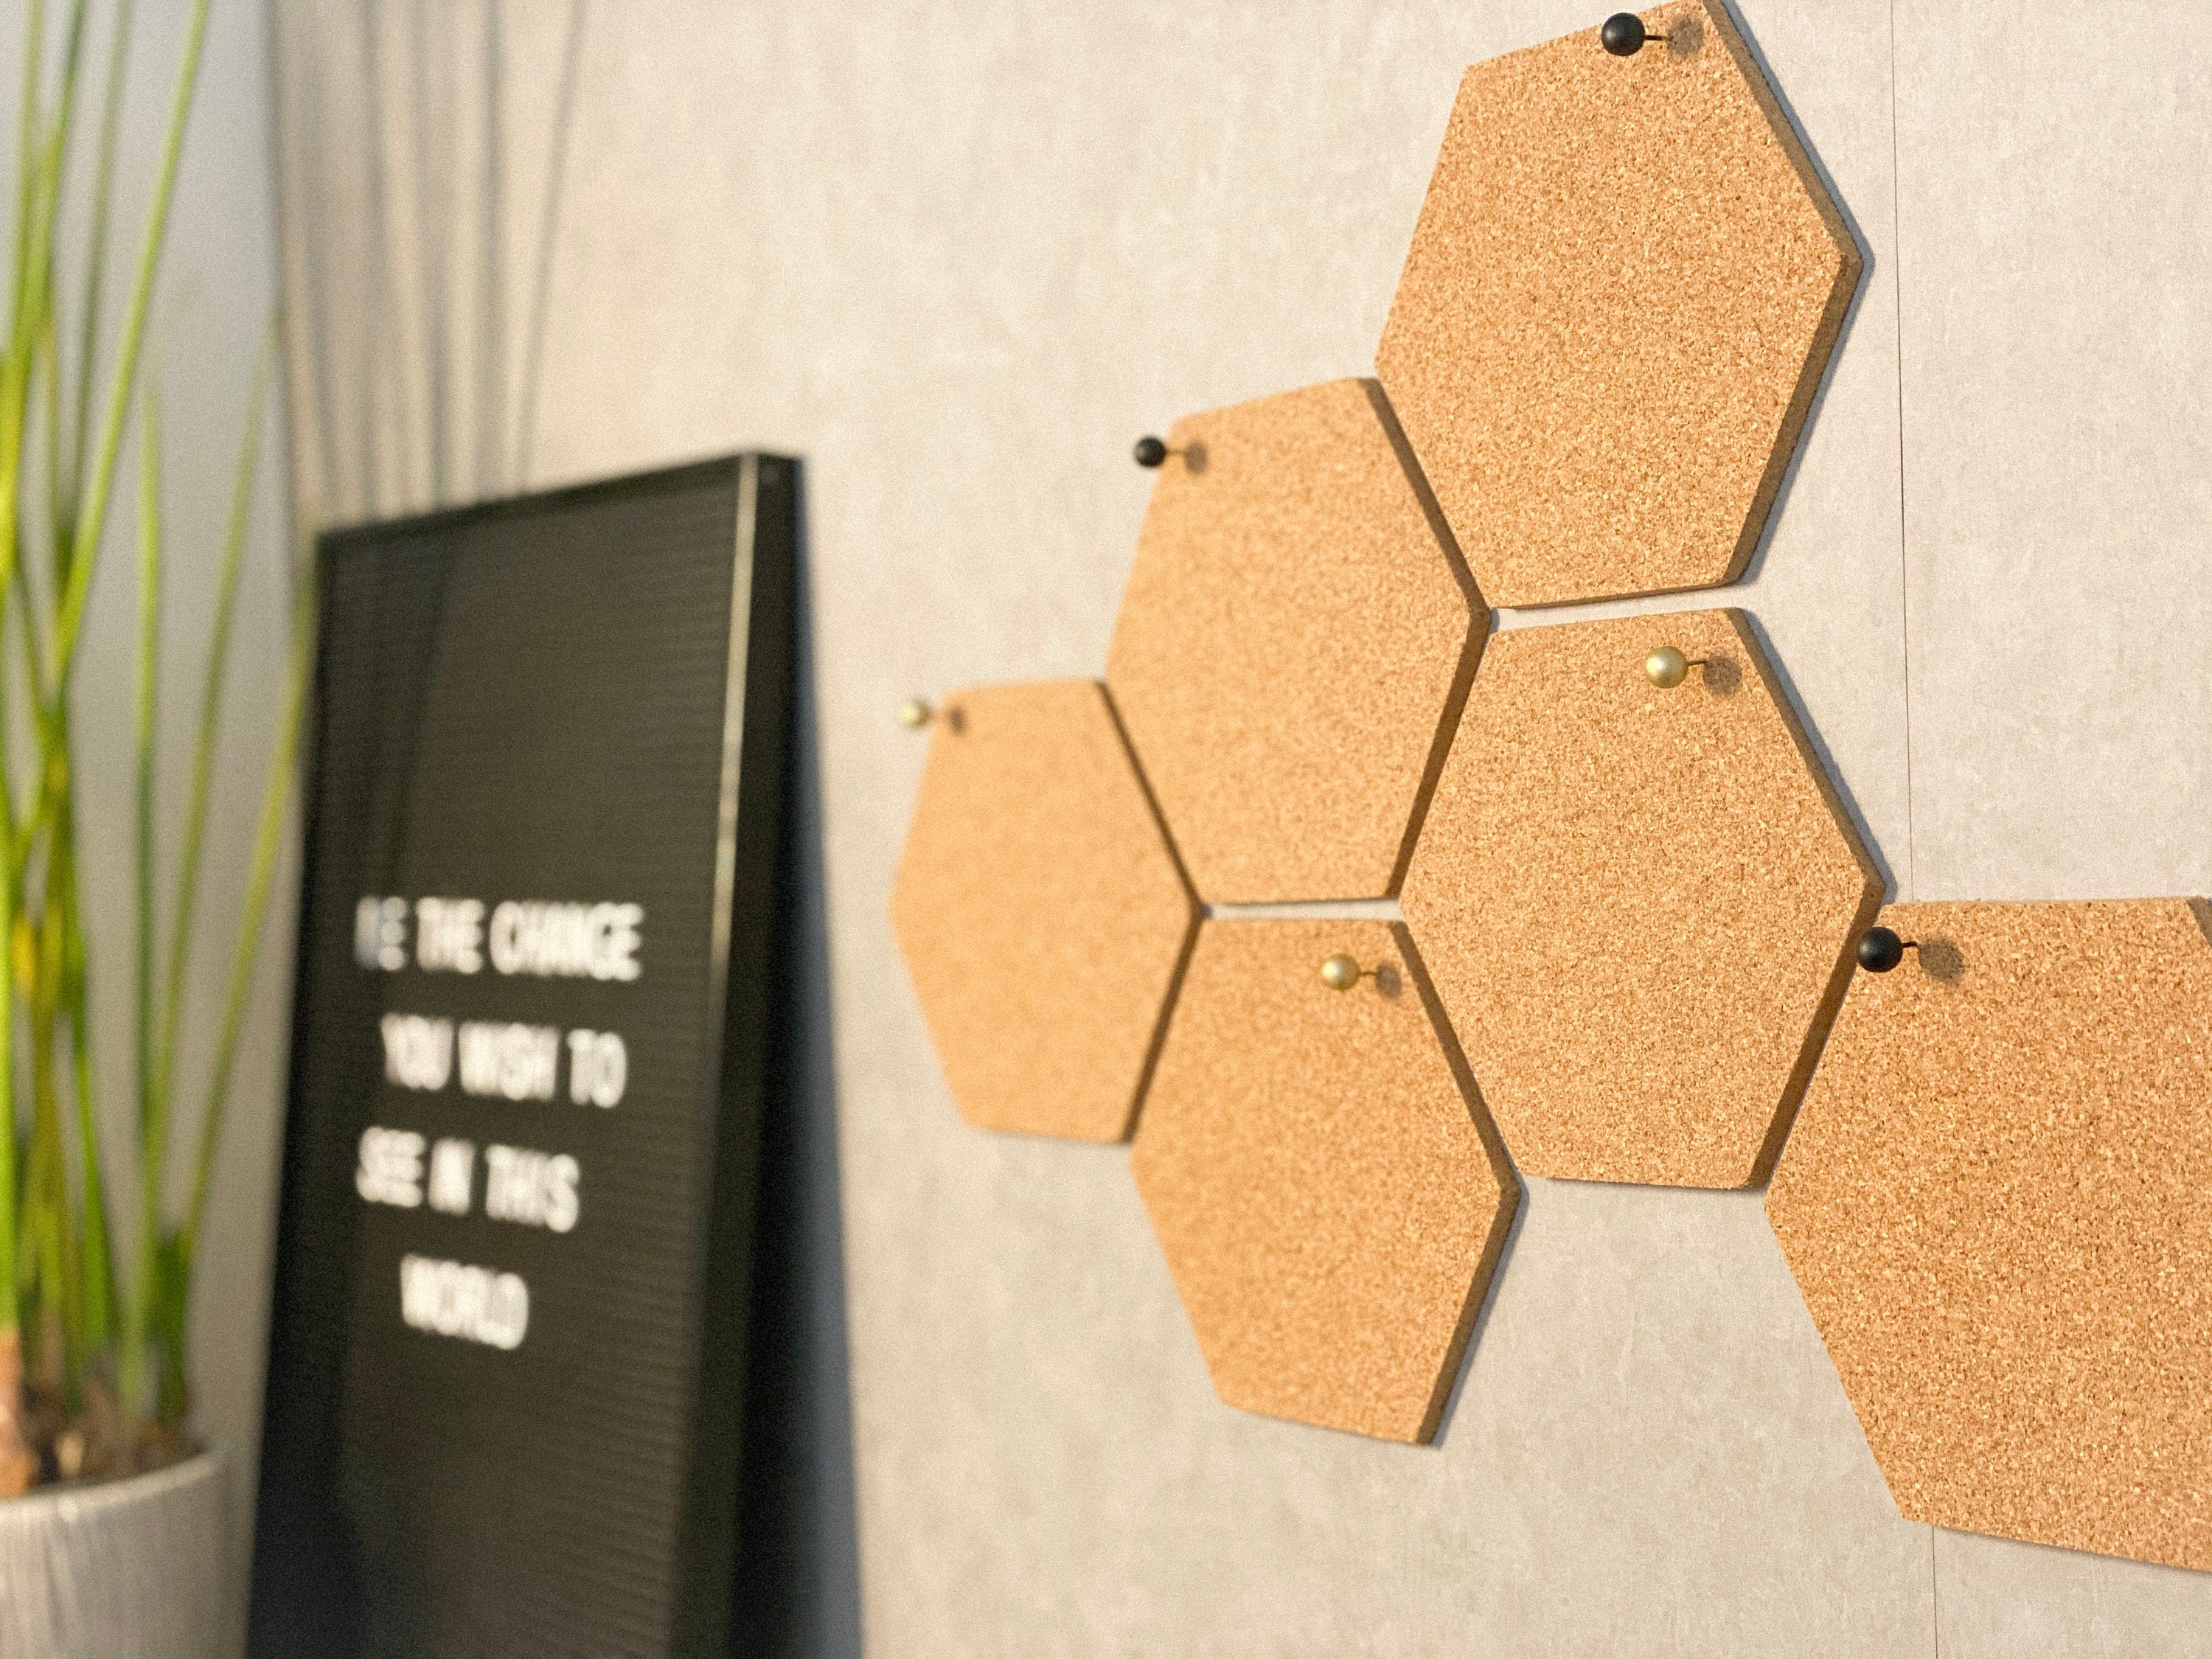 Enamel Pin Board Display for Pin Collectors hexagon Wall Mount Enamel Pin  Display / Pin Holder for Your Pin Collection various Colors 